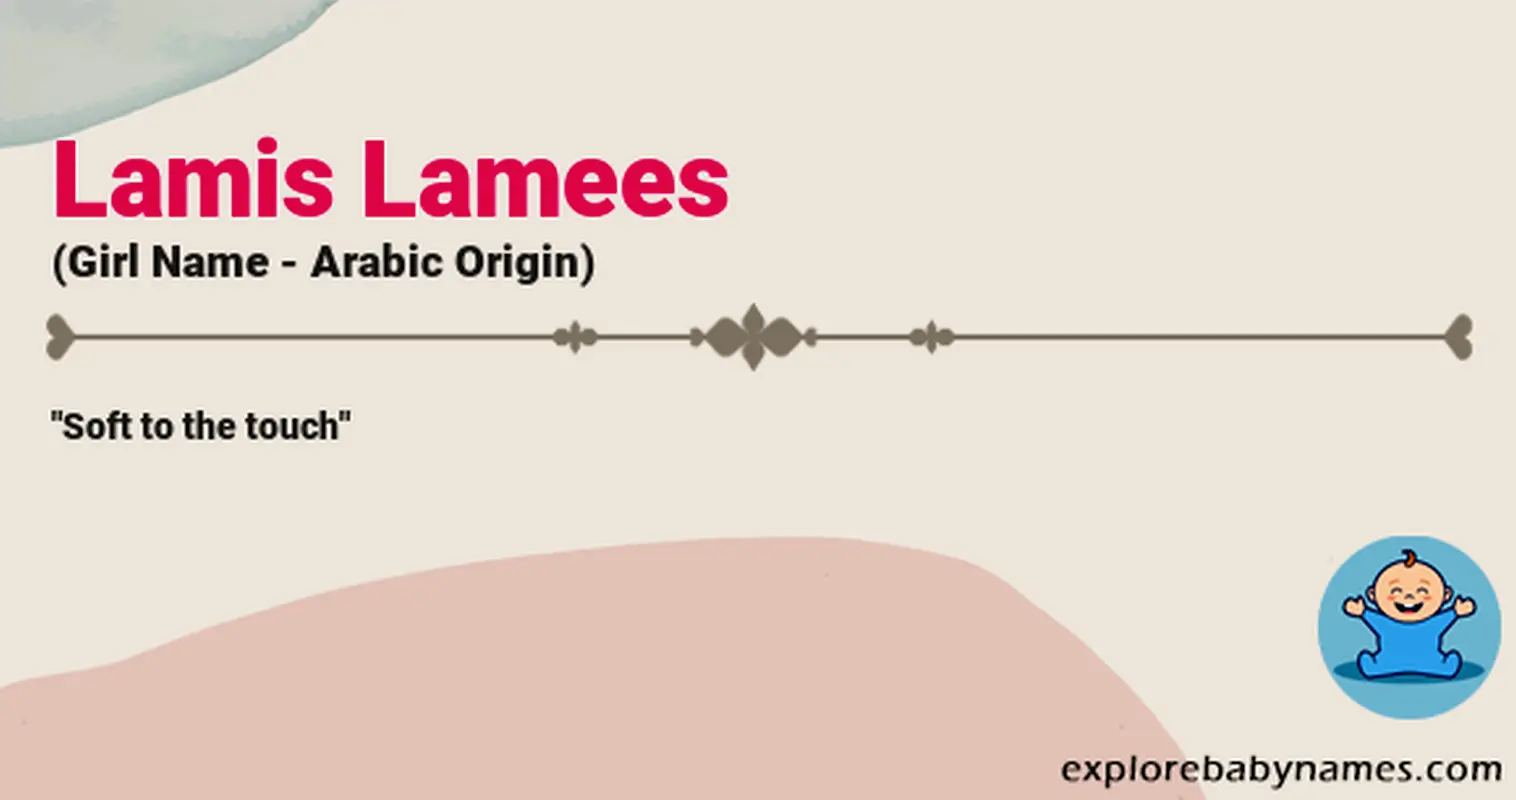 Meaning of Lamis Lamees